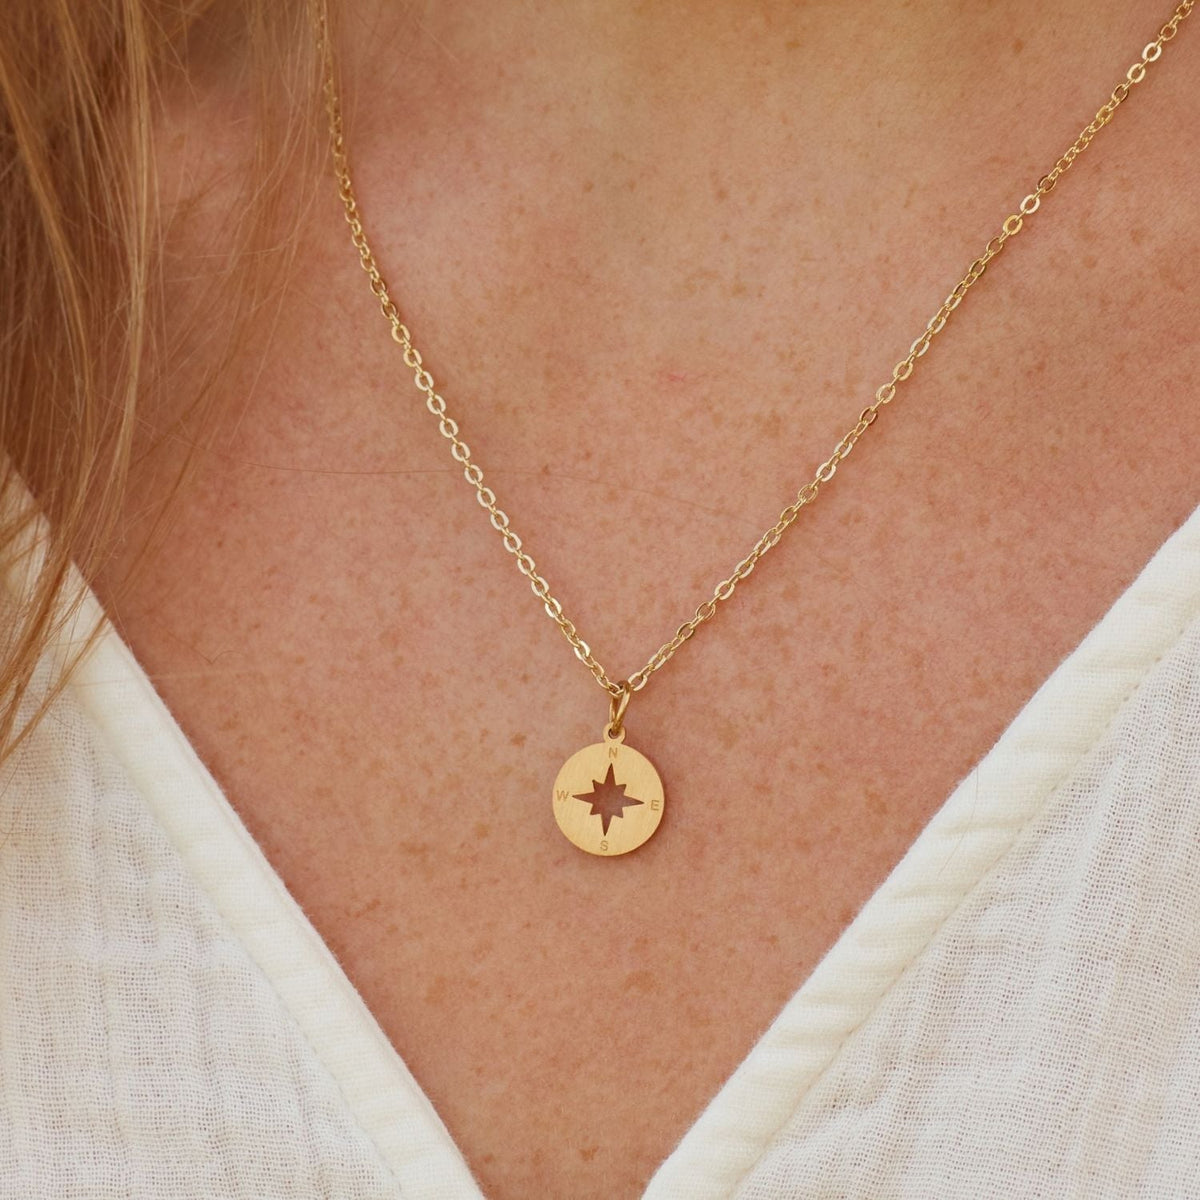 To My Gorgeous Fiancé | God&#39;s Power in Your Life | Compass Necklace